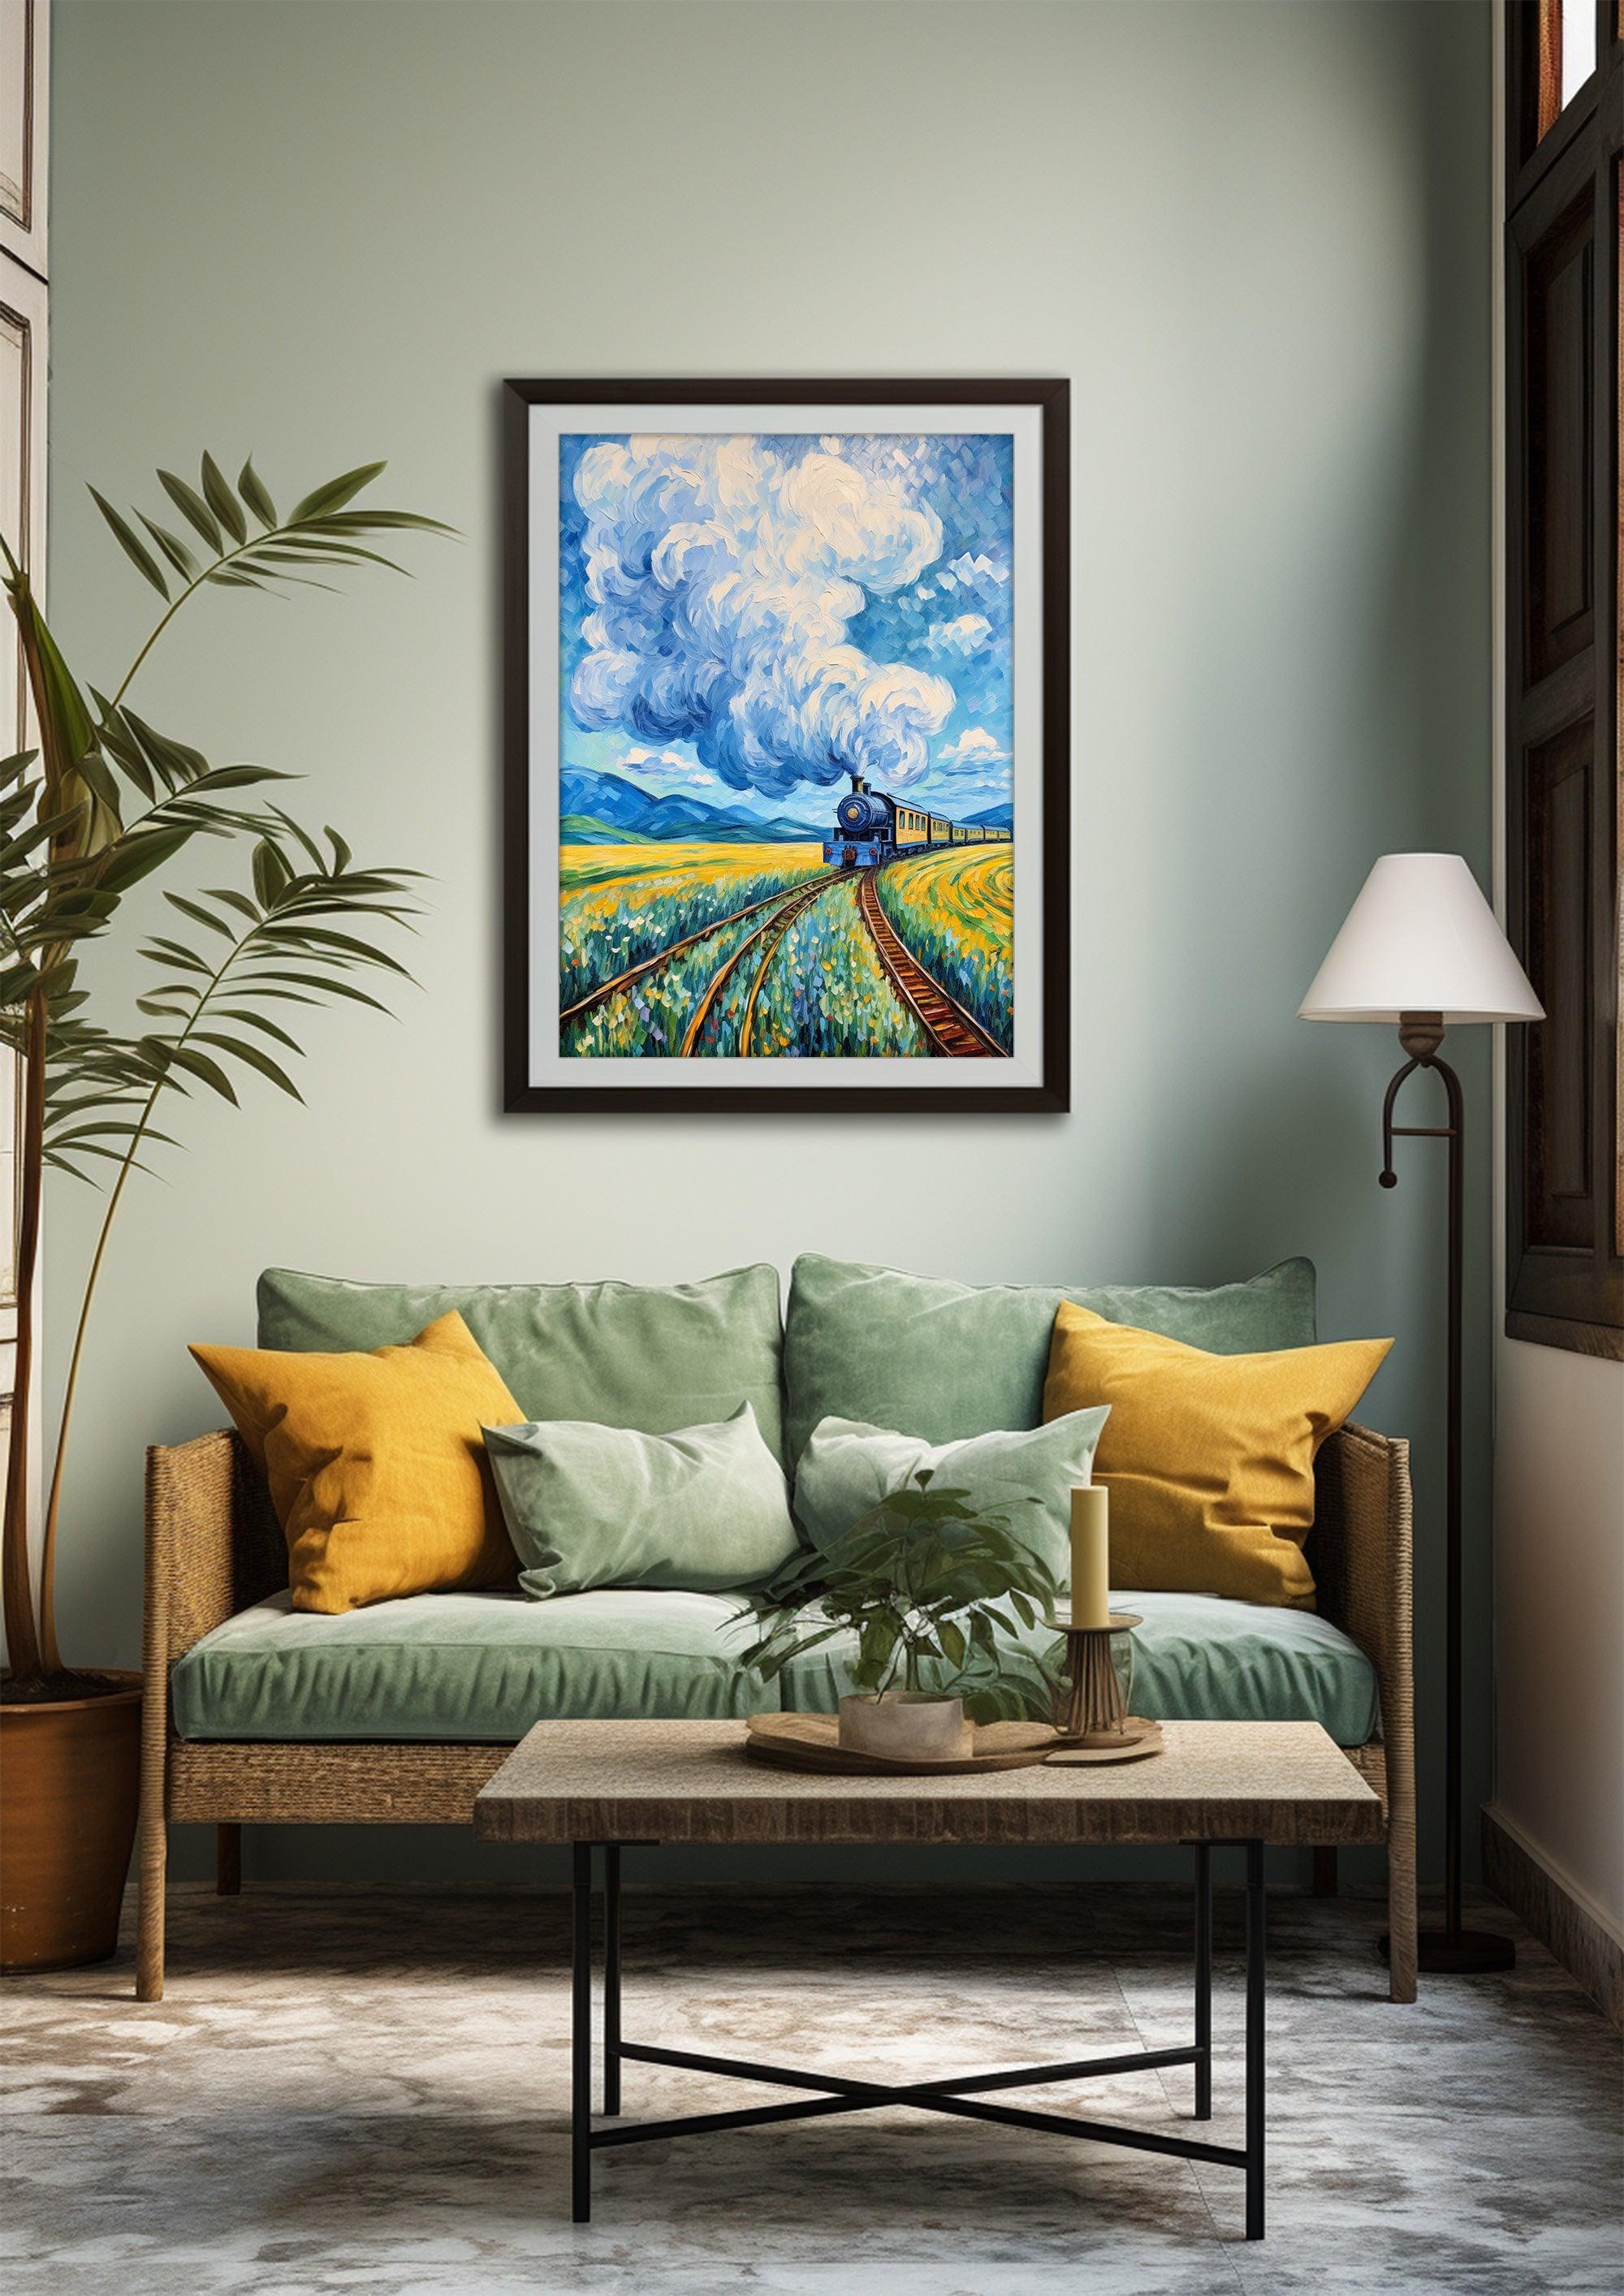 Landscape,Moody Wall Decor, Living Room Decor,High-Quality professional Giclee technique #11